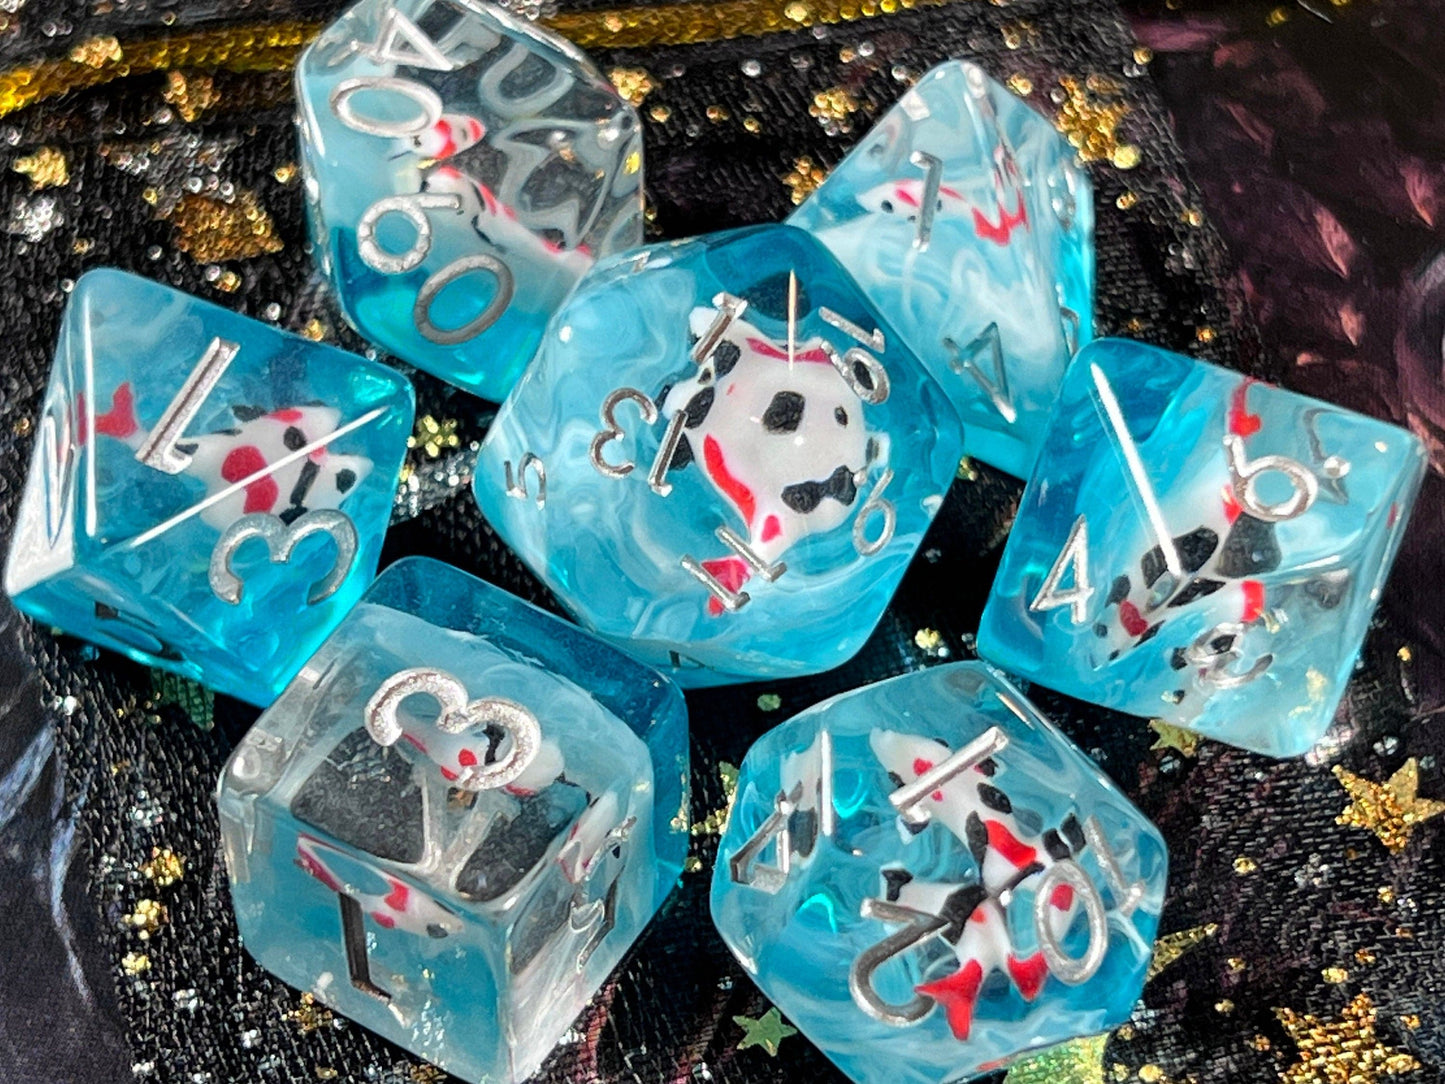 The Crooked Tavern Dice Sets Topaz Koi Fish RPG Dice Set | Red and Black Koi Fish with Swirling Blue Resin